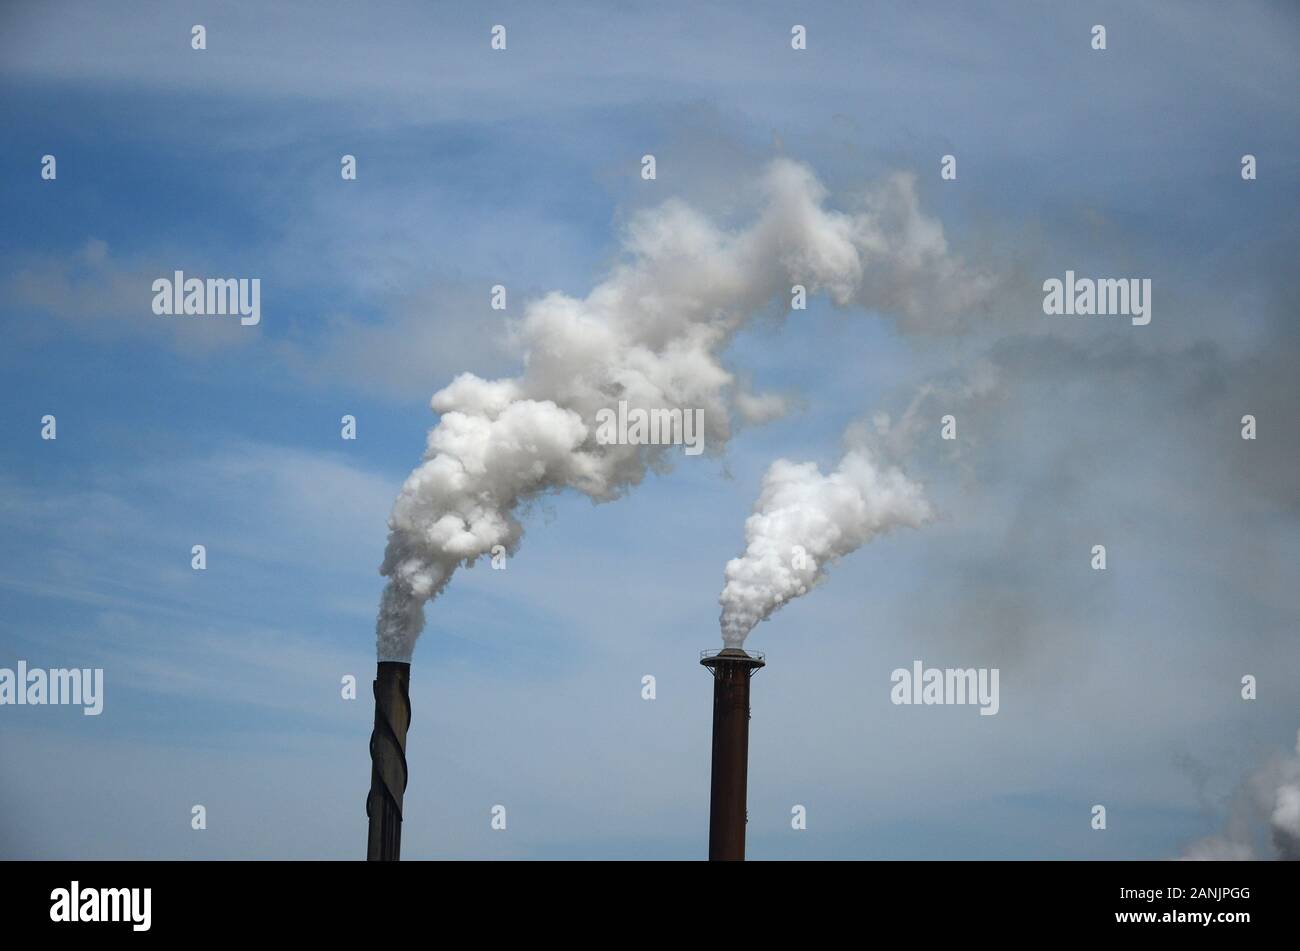 Industrial pollution, global warming Stock Photo